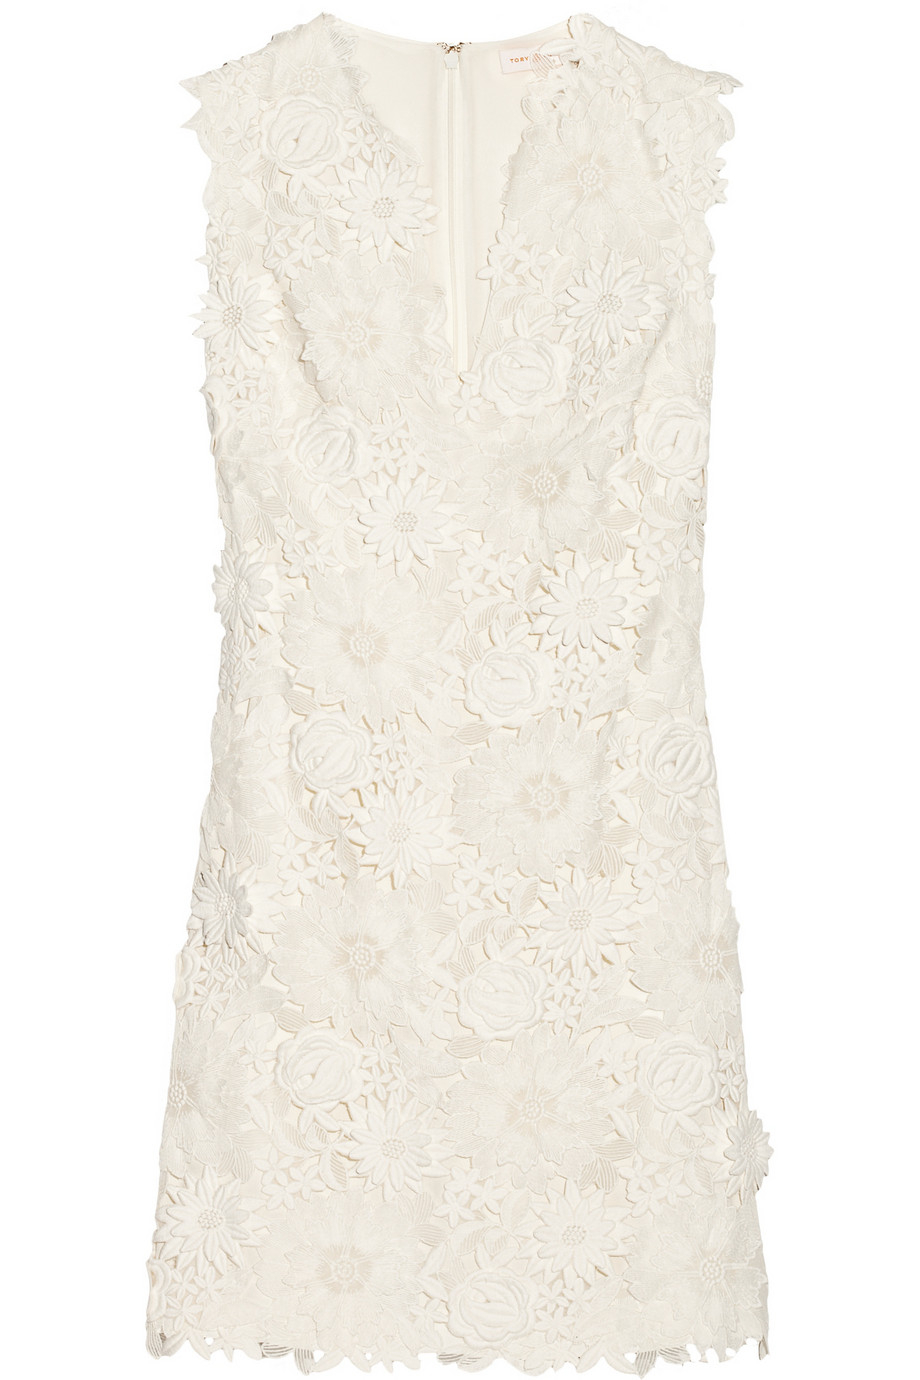 Tory burch Merida Guipure Lace and Silk Dress in White | Lyst